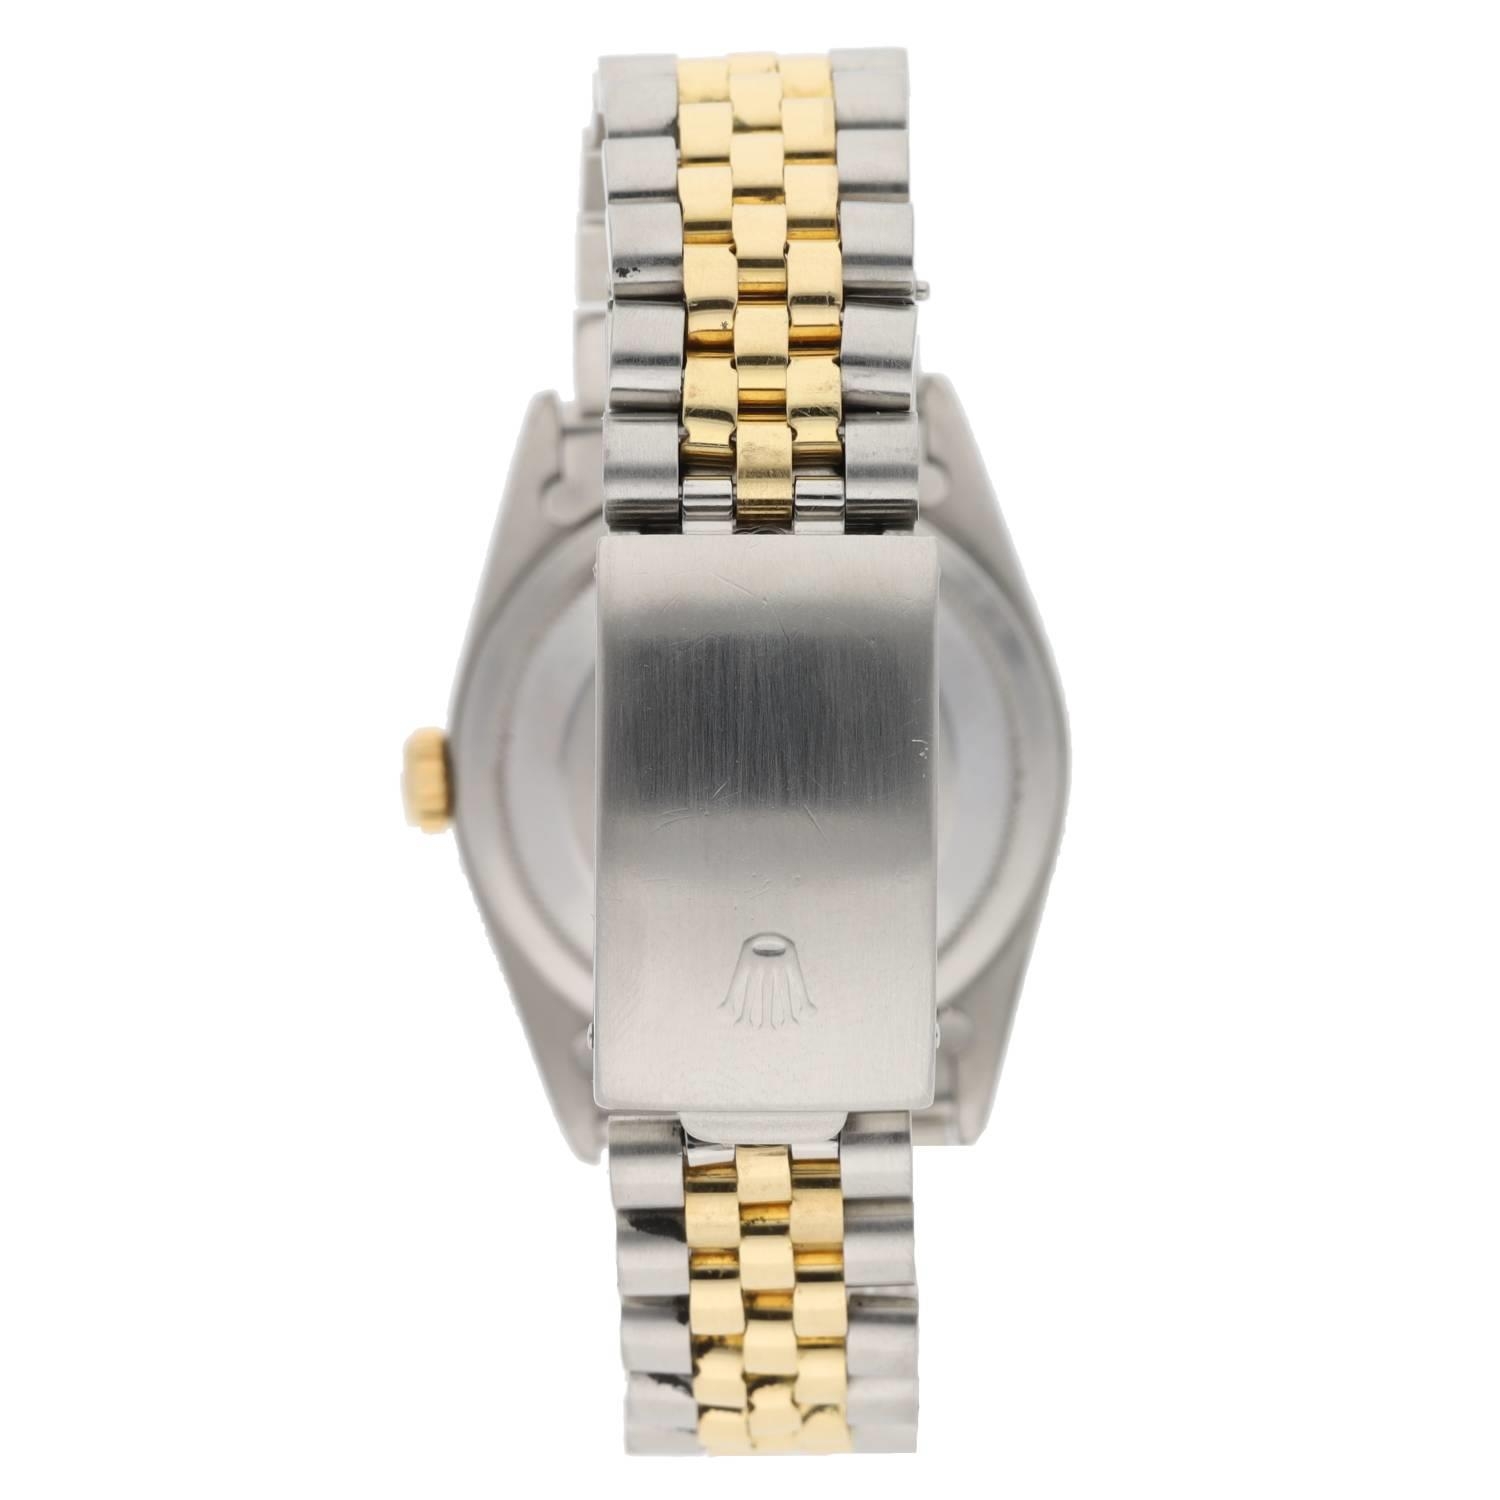 Rolex Oyster Perpetual Datejust gold and stainless steel gentleman's wristwatch, reference no. - Image 4 of 5